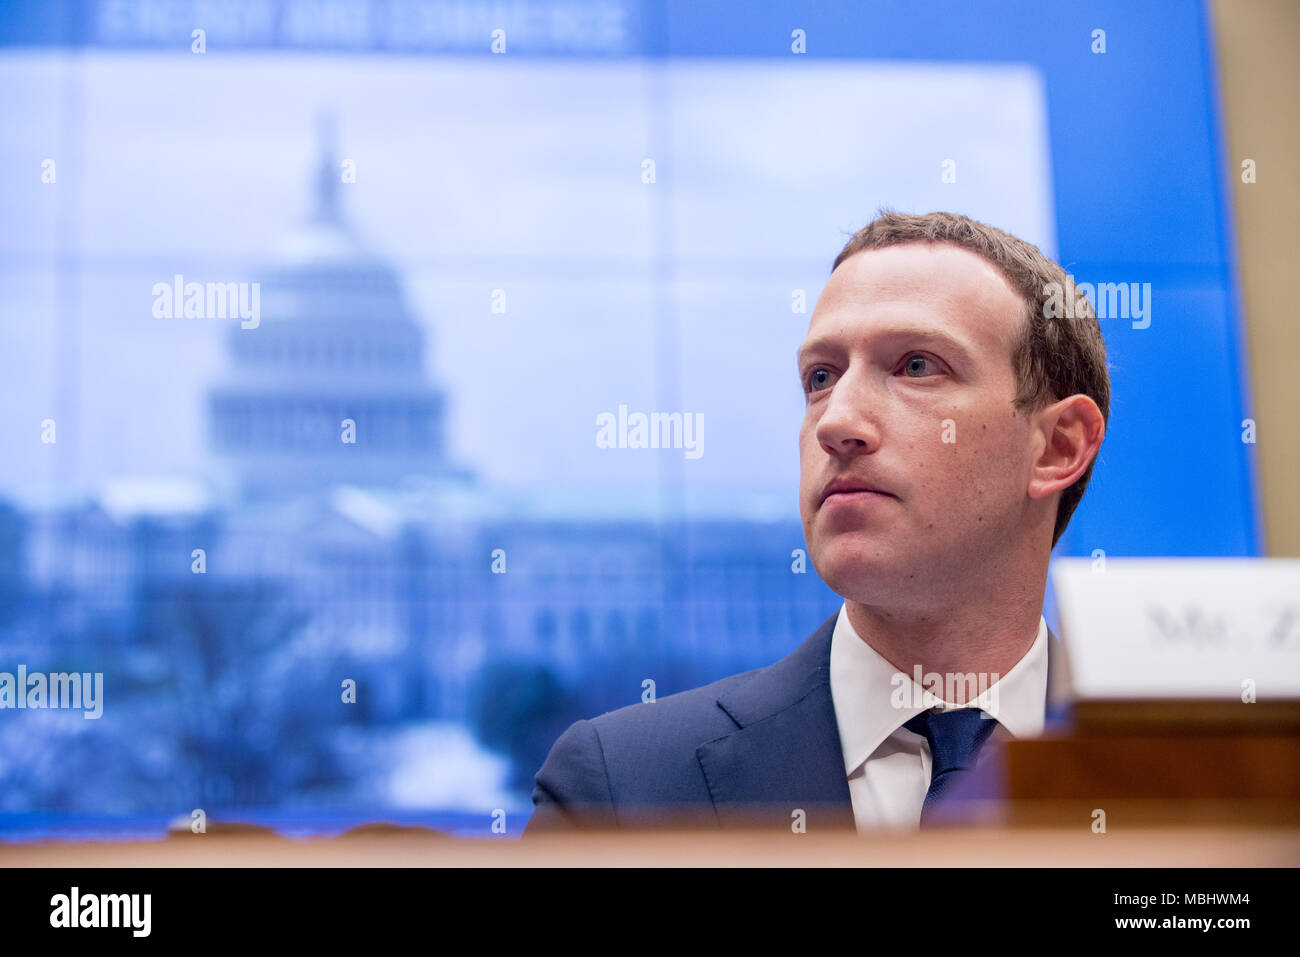 Washington, District of Columbia, USA. 11th Apr, 2018. Facebook CEO Mark Zuckerberg appears before the House Energy and Commerce Committee. Credit: Erin Scott/ZUMA Wire/Alamy Live News Stock Photo